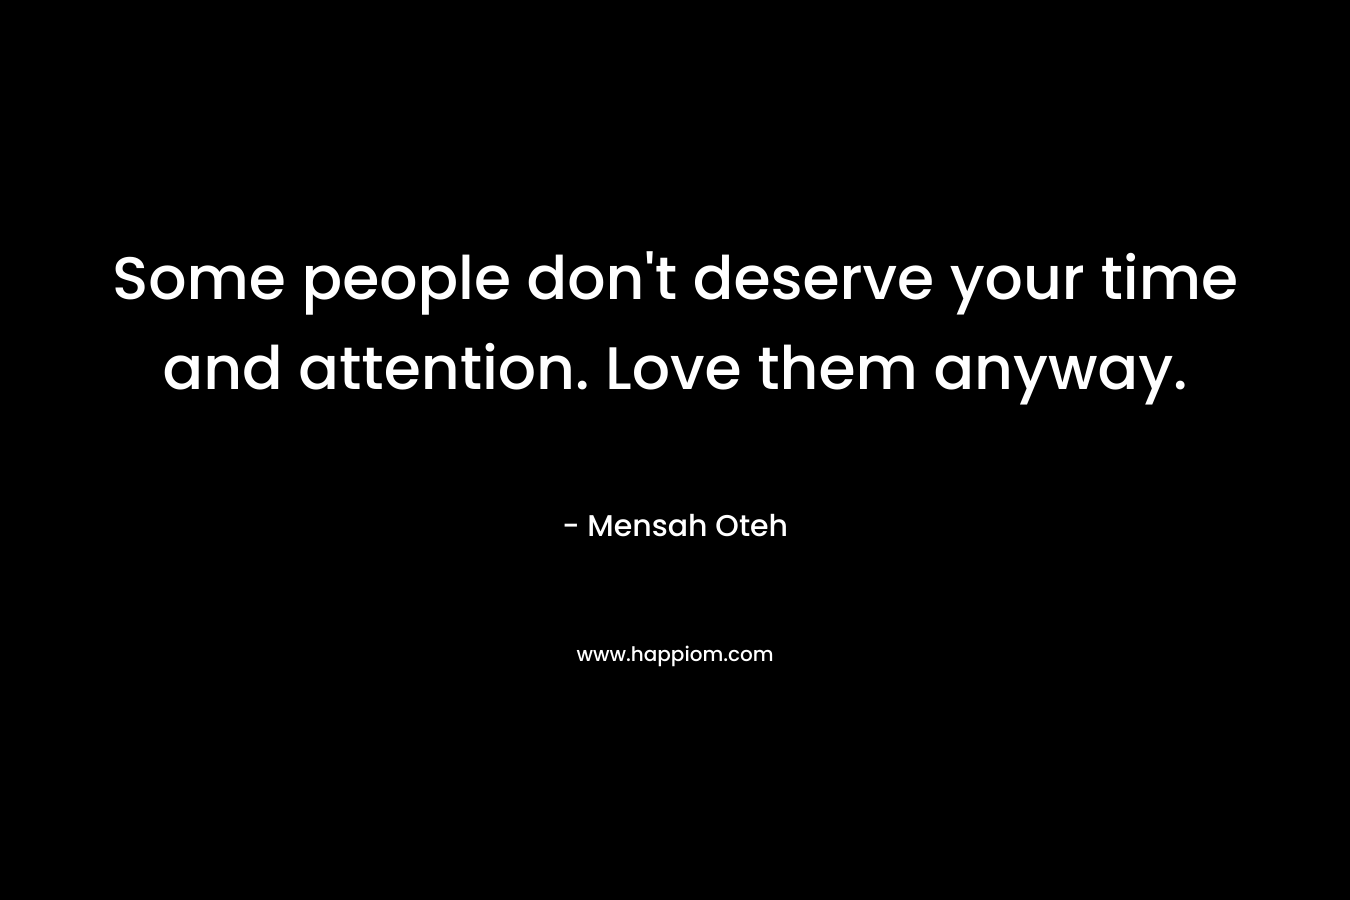 Some people don't deserve your time and attention. Love them anyway.